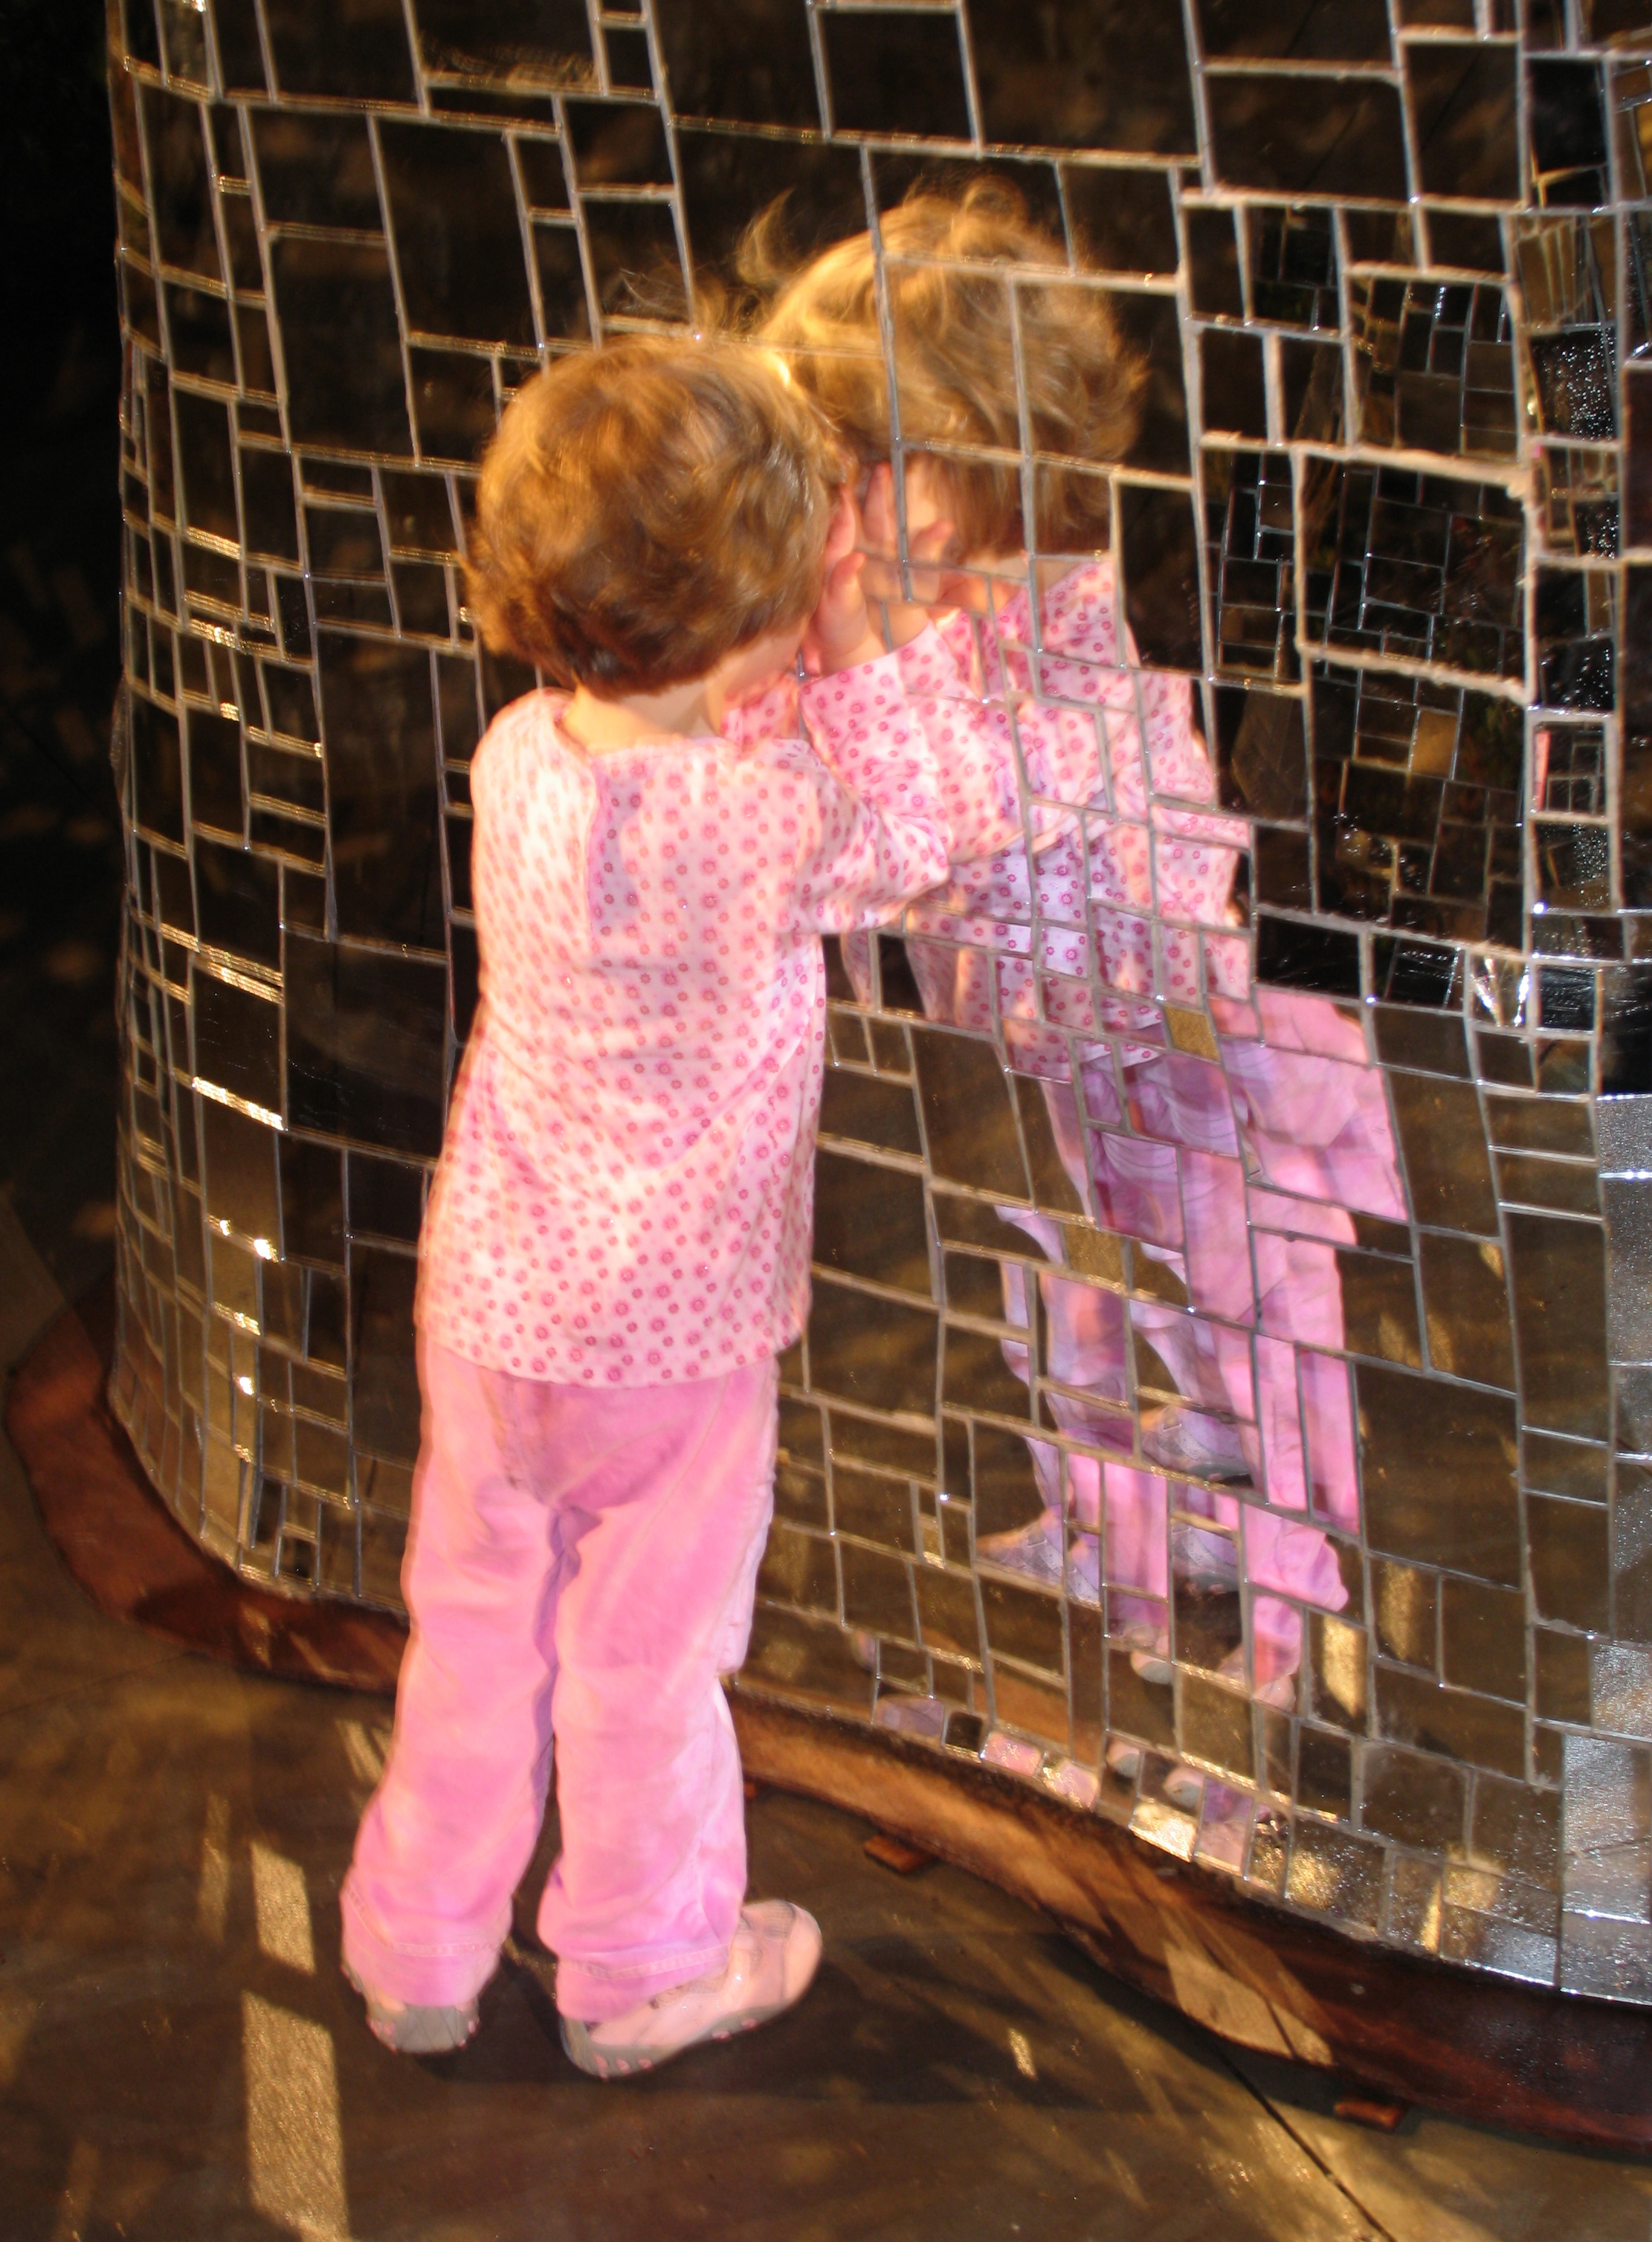 A young girl dressed in pink leans her forehead against a wall of glass tiles